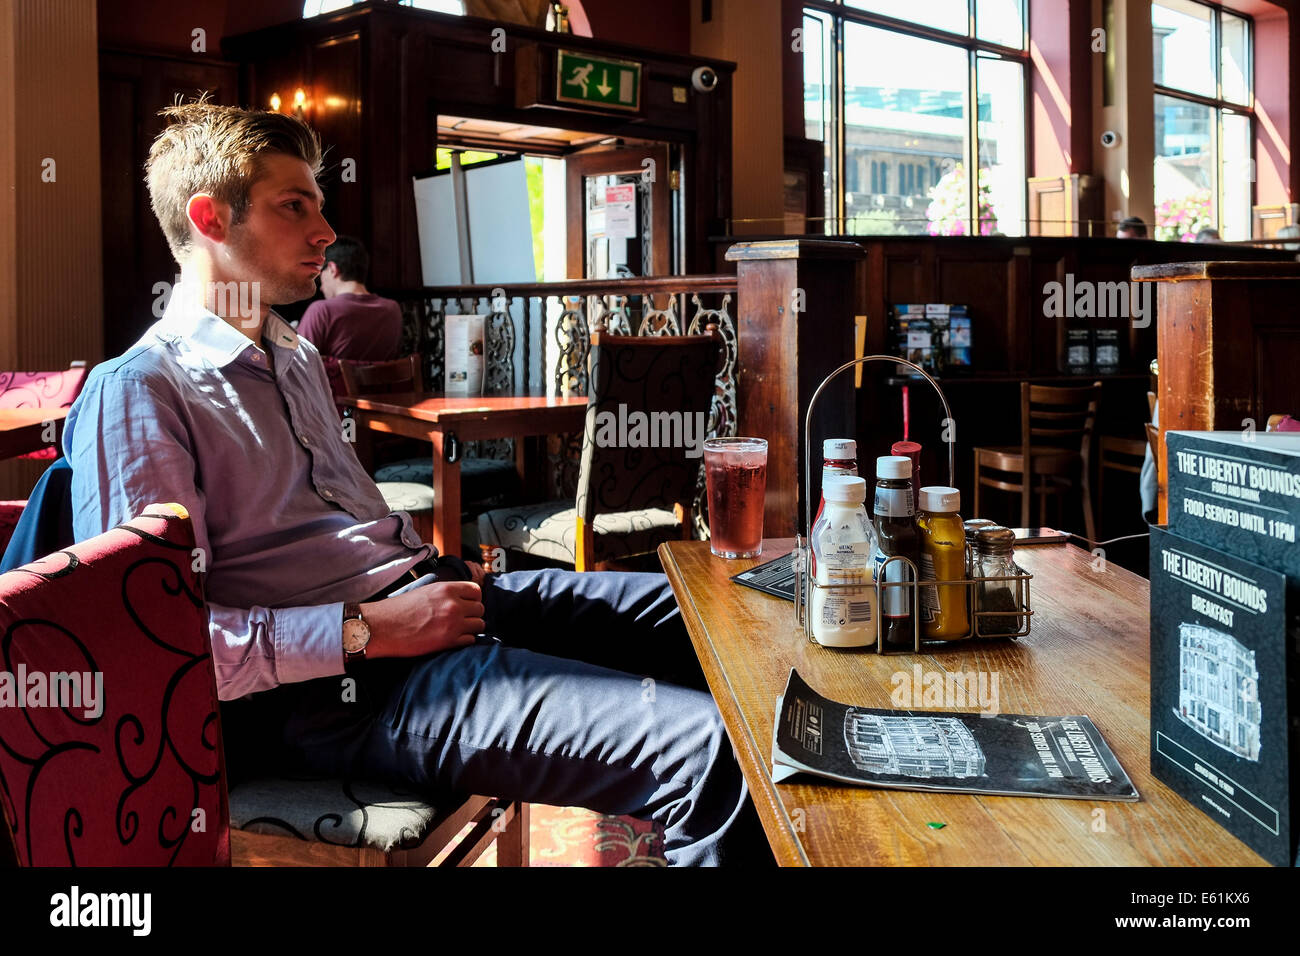 A customer sitting in the Liberty Bounds.  A Weatherspoons pub. Stock Photo